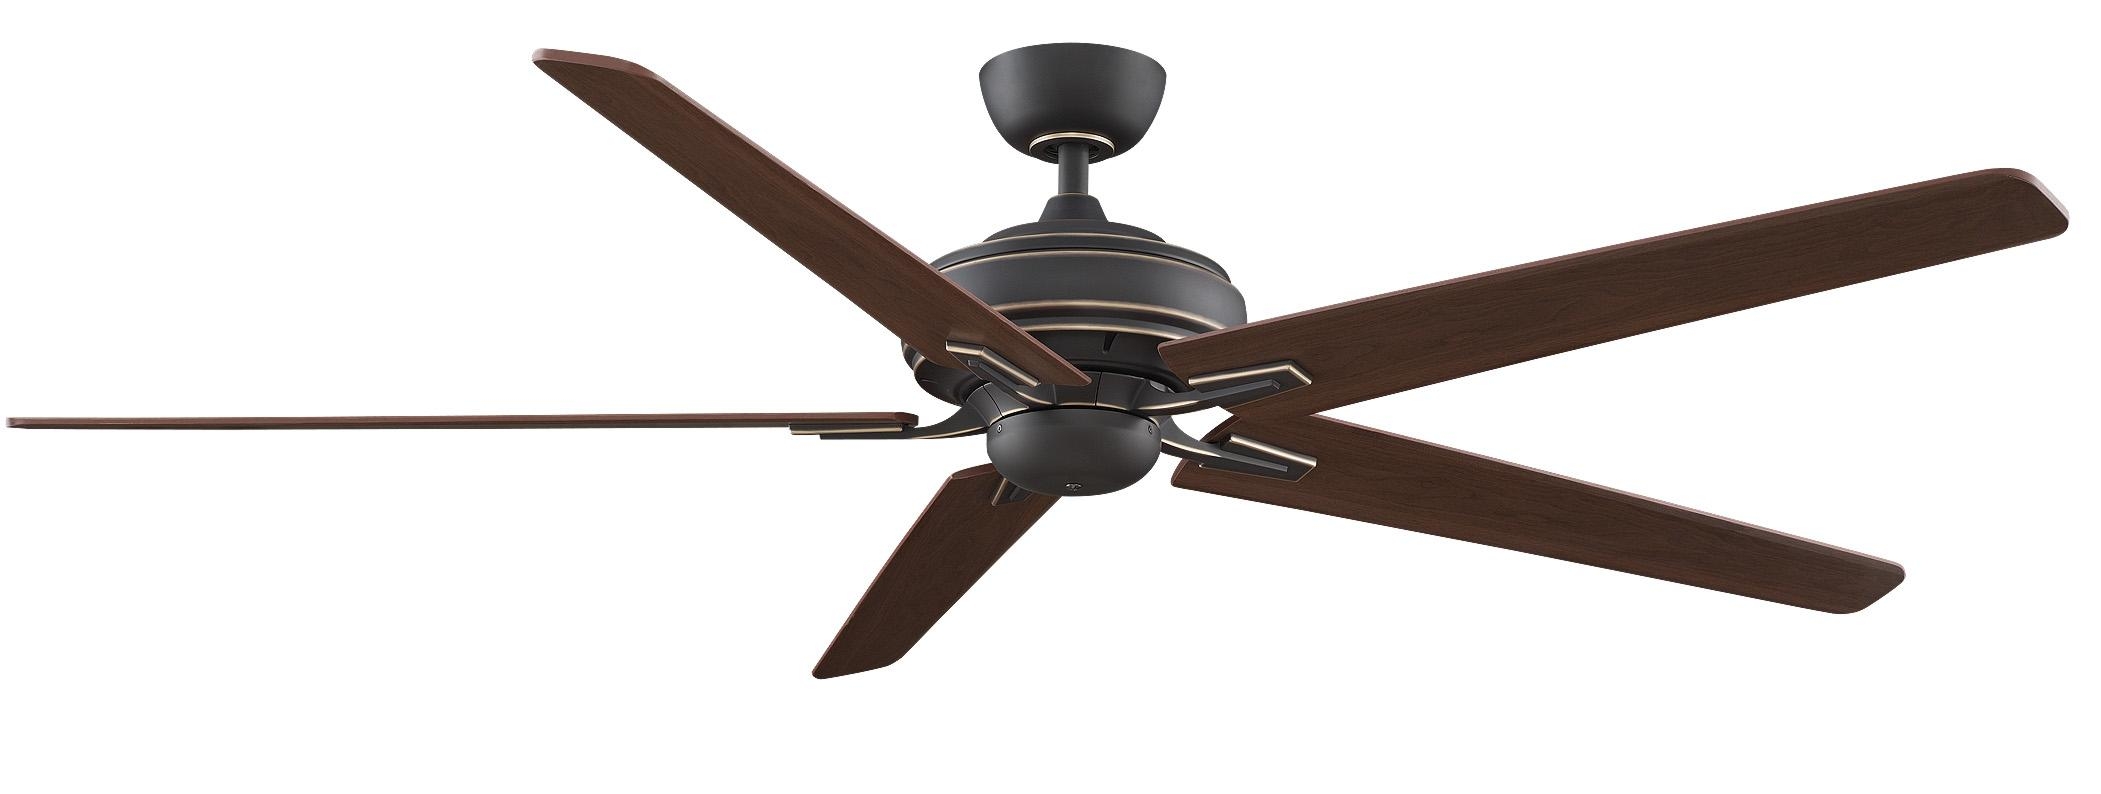 60 Ceiling Fans Without Lights2101 X 794